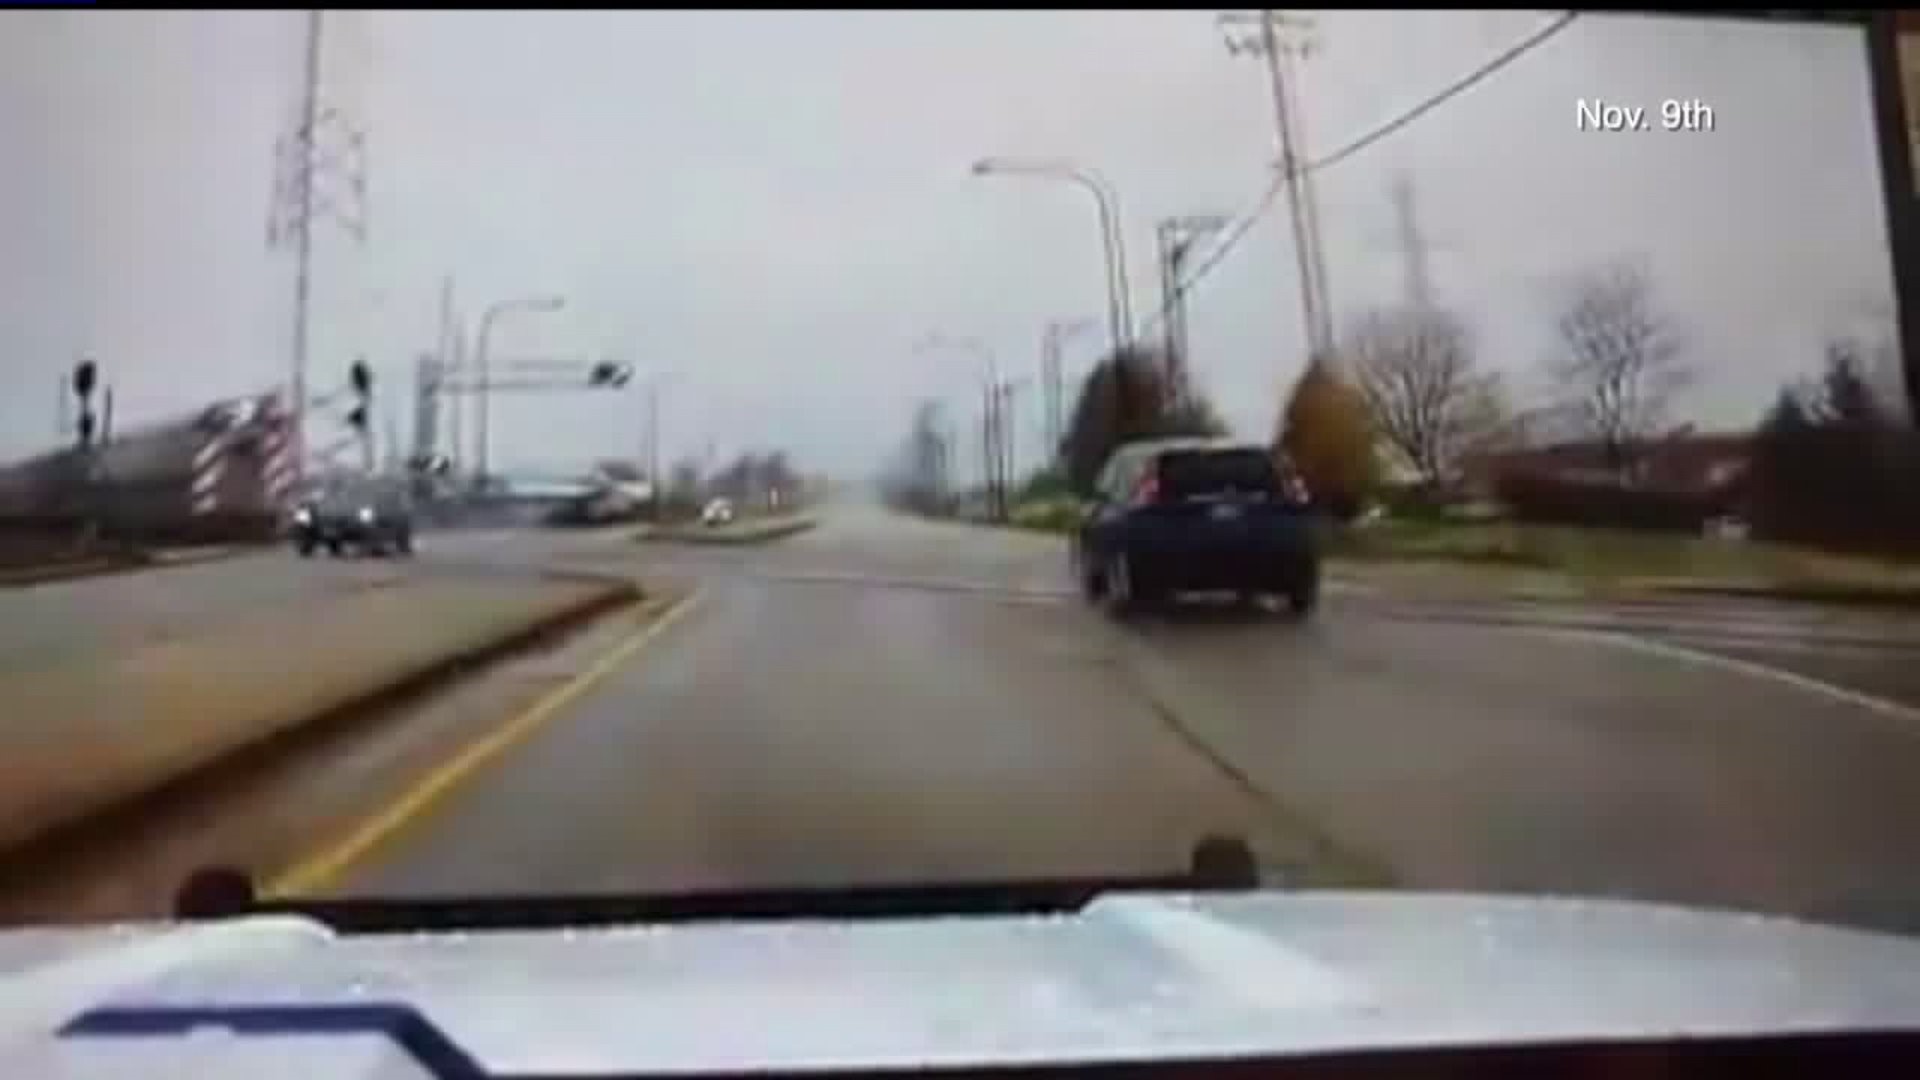 Police squad has close call with train